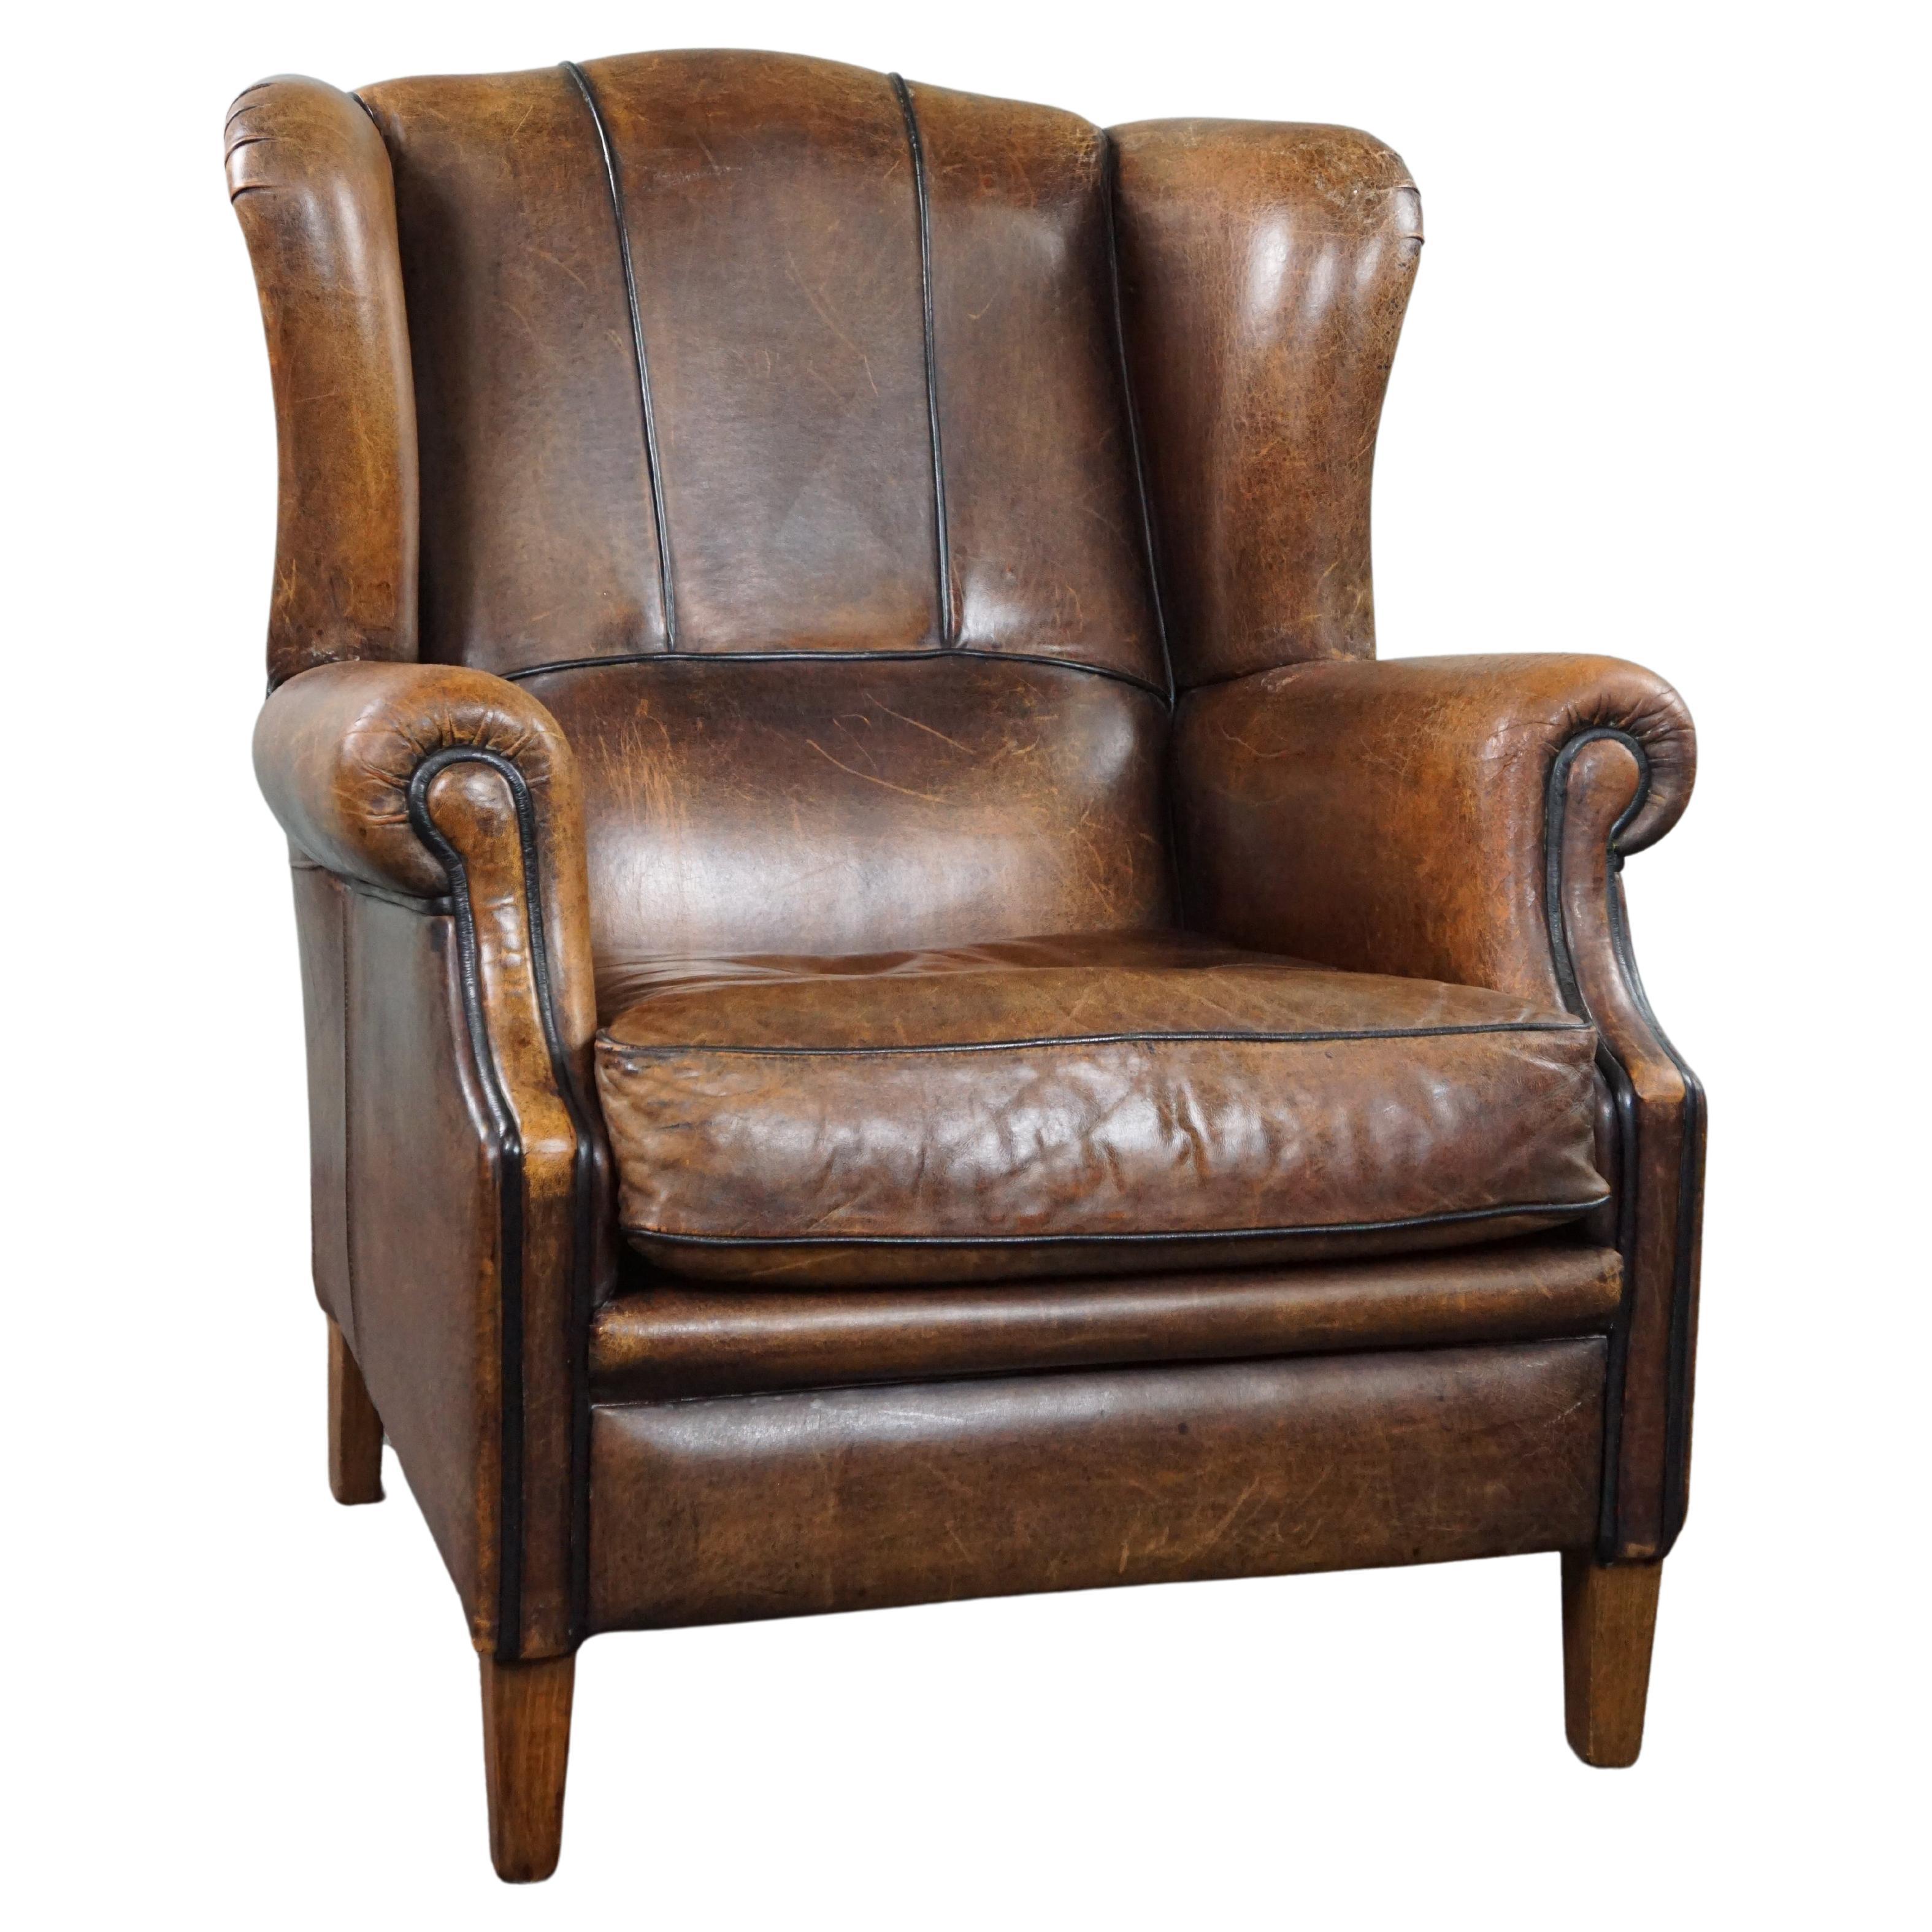 Charming sheepskin wingback chair with black piping and a beautiful patina For Sale